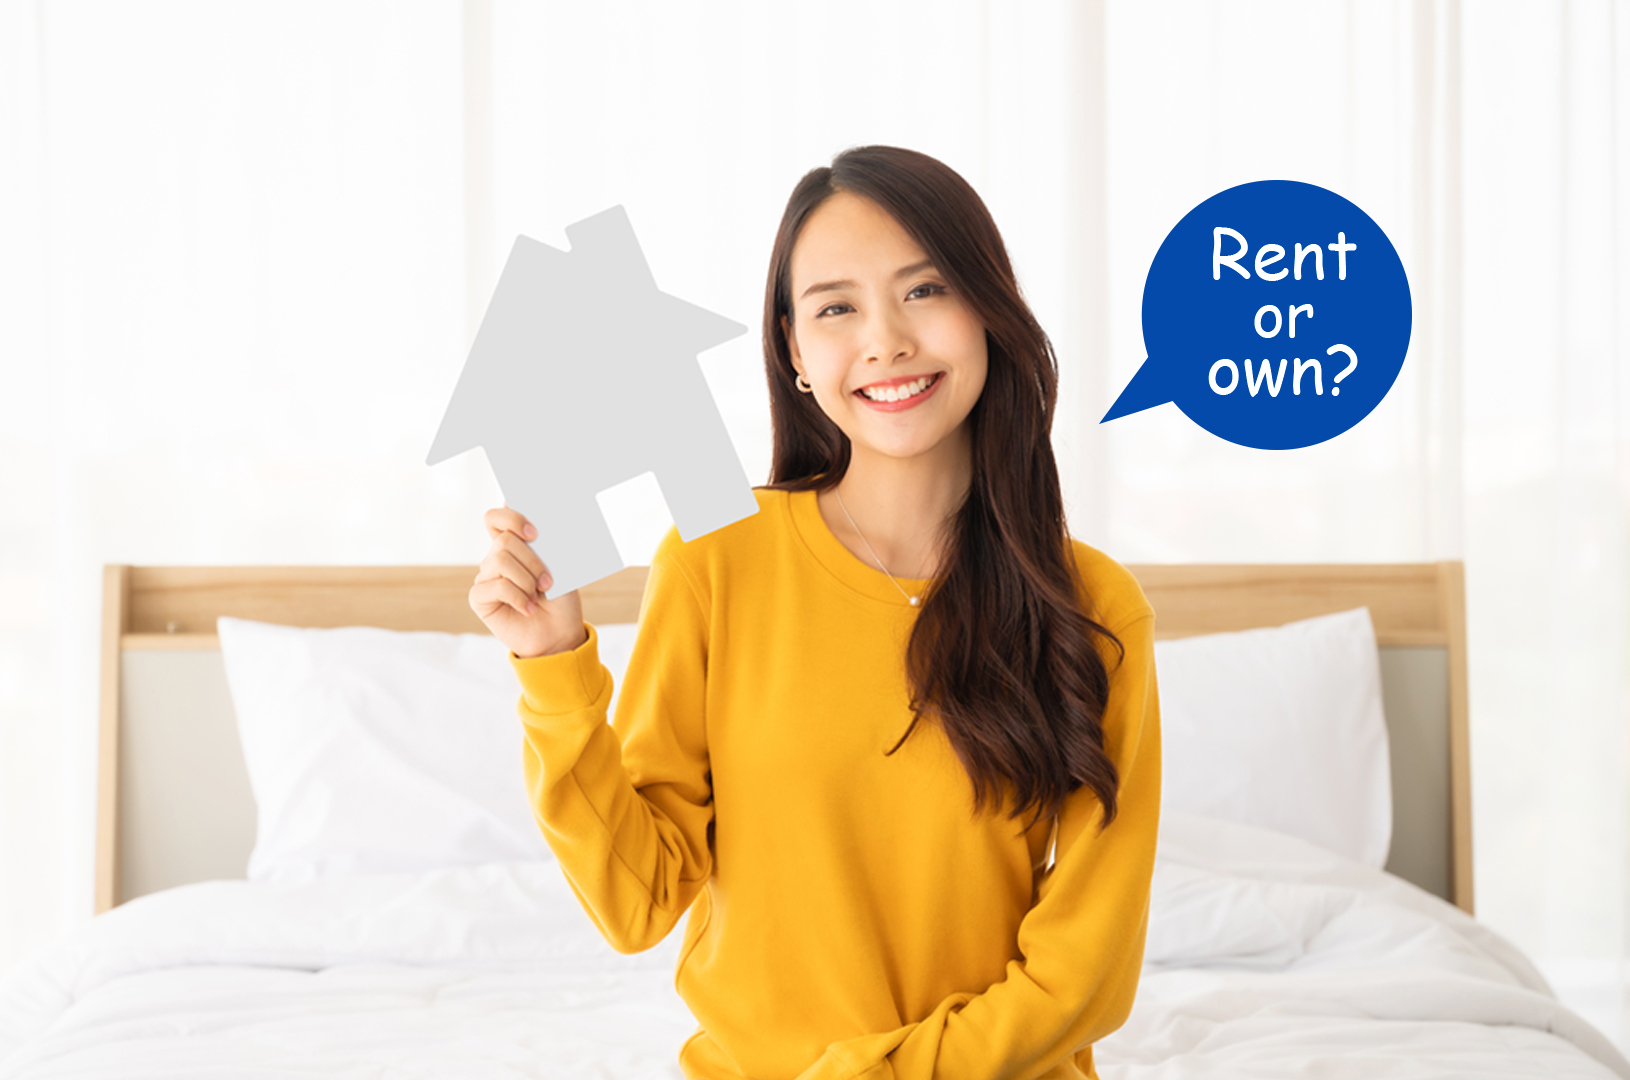 Making choices: Rent or own?'s Image